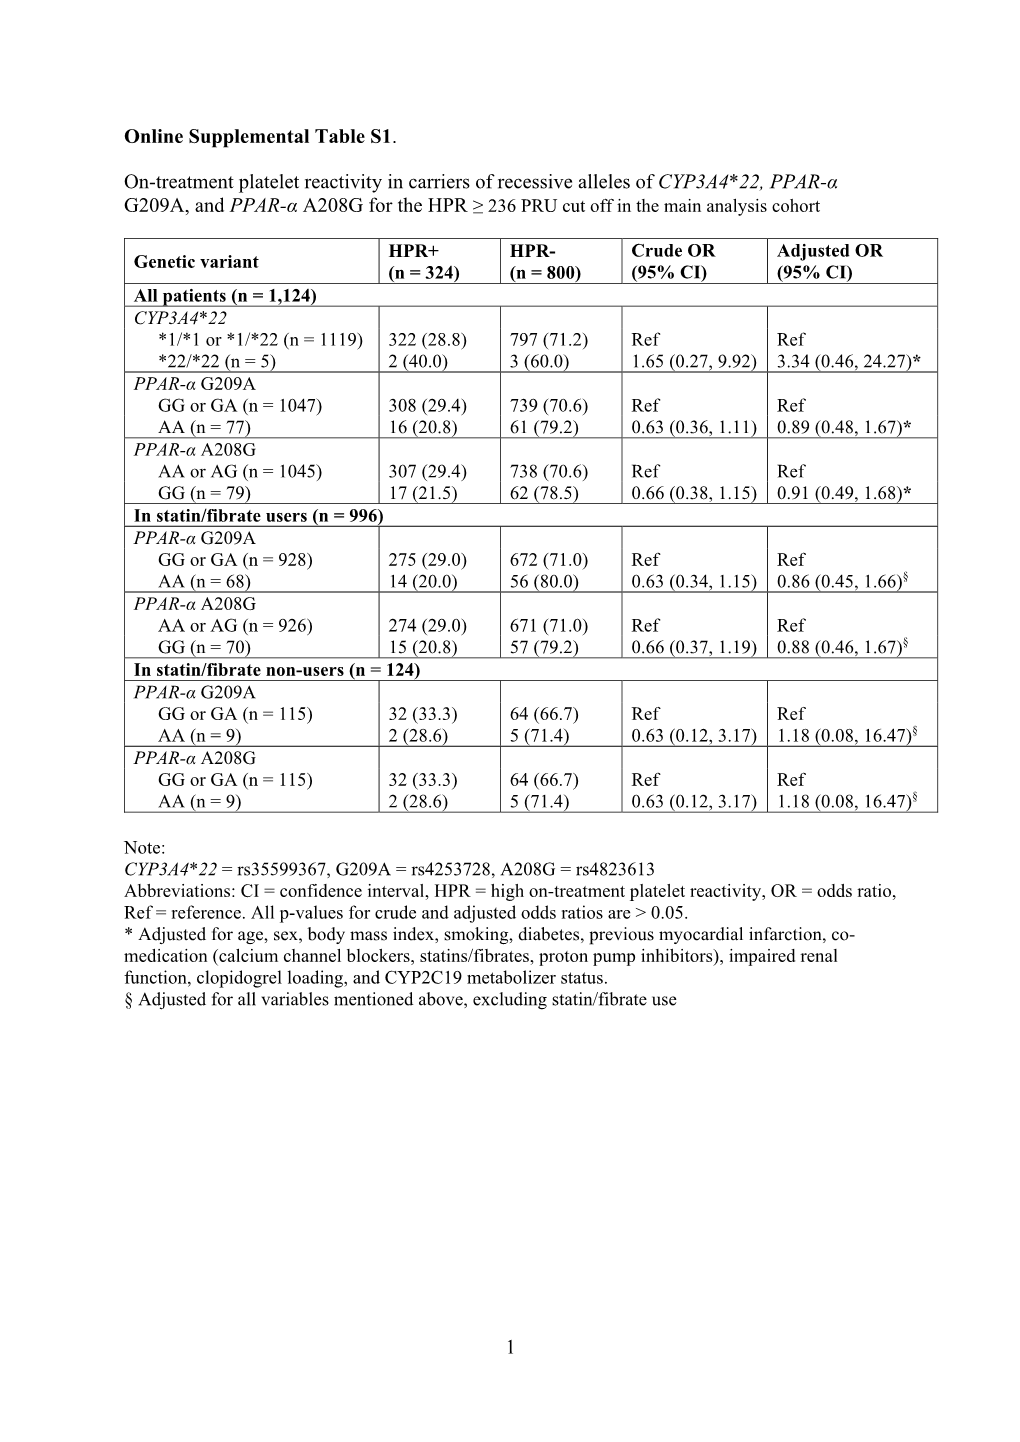 1 Online Supplemental Table S1. On-Treatment Platelet Reactivity In